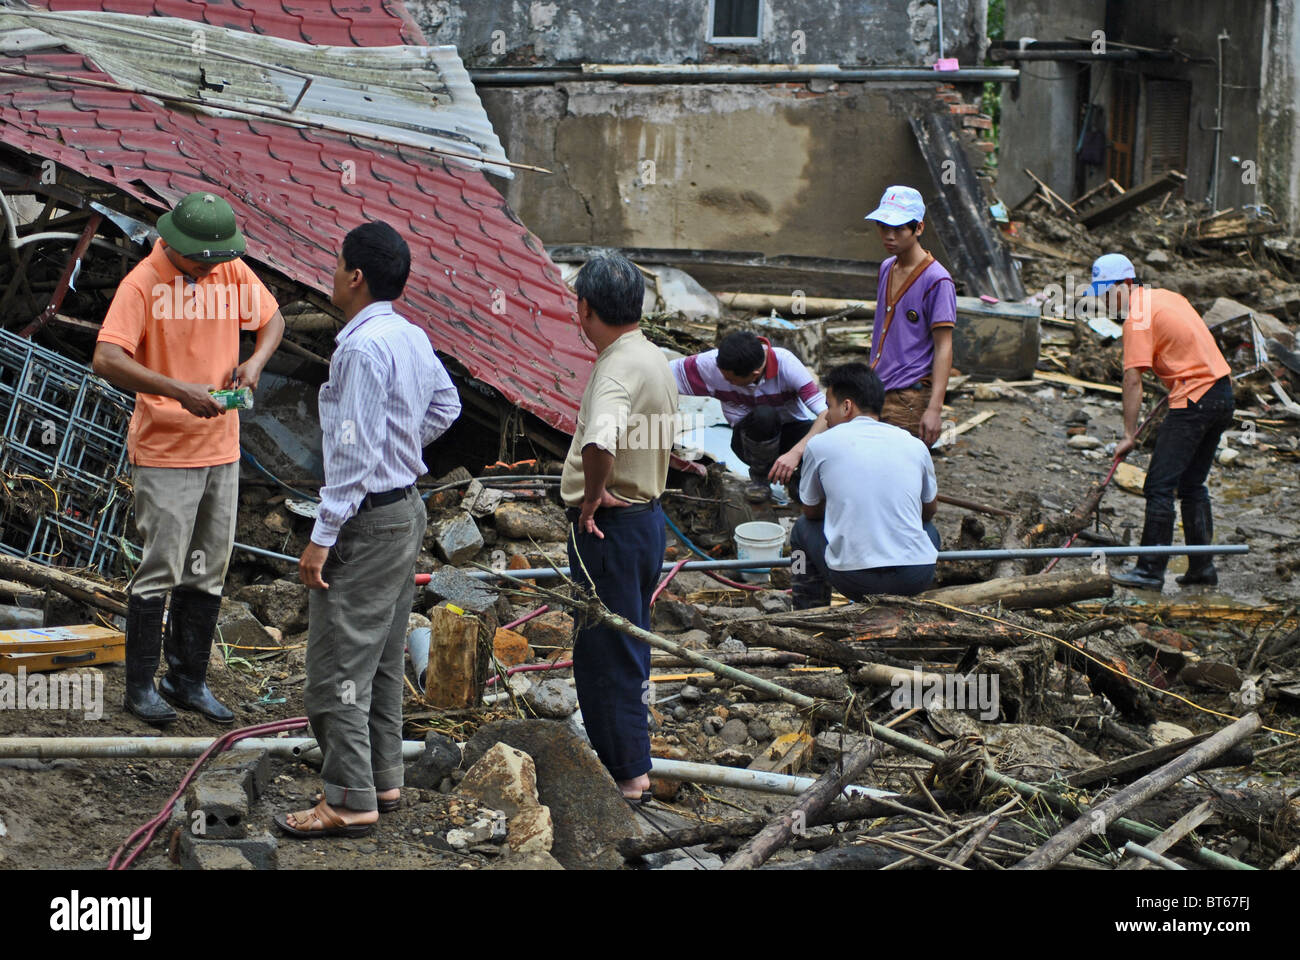 Collapsed house and workmen after a landslide triggered by heavy rain near Sapa, Northern Vietnam Stock Photo